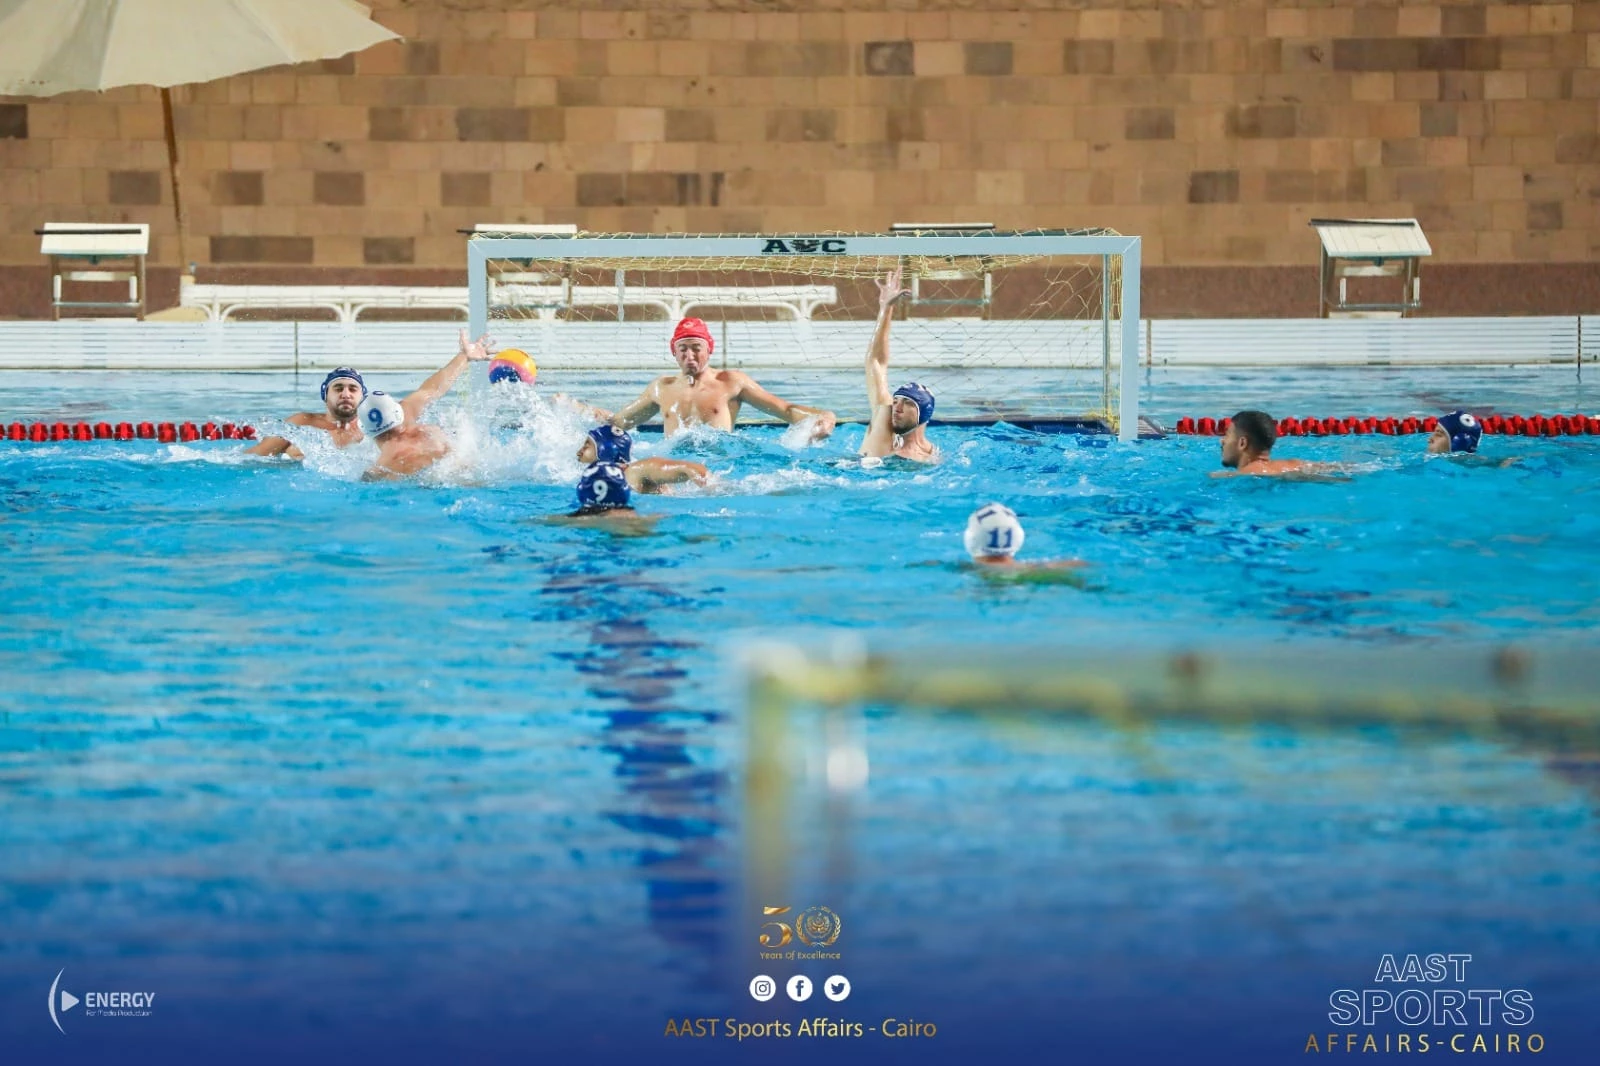 The Academy's water polo team in Cairo wins silver in the championship of private universities held at the American University in Cairo.6